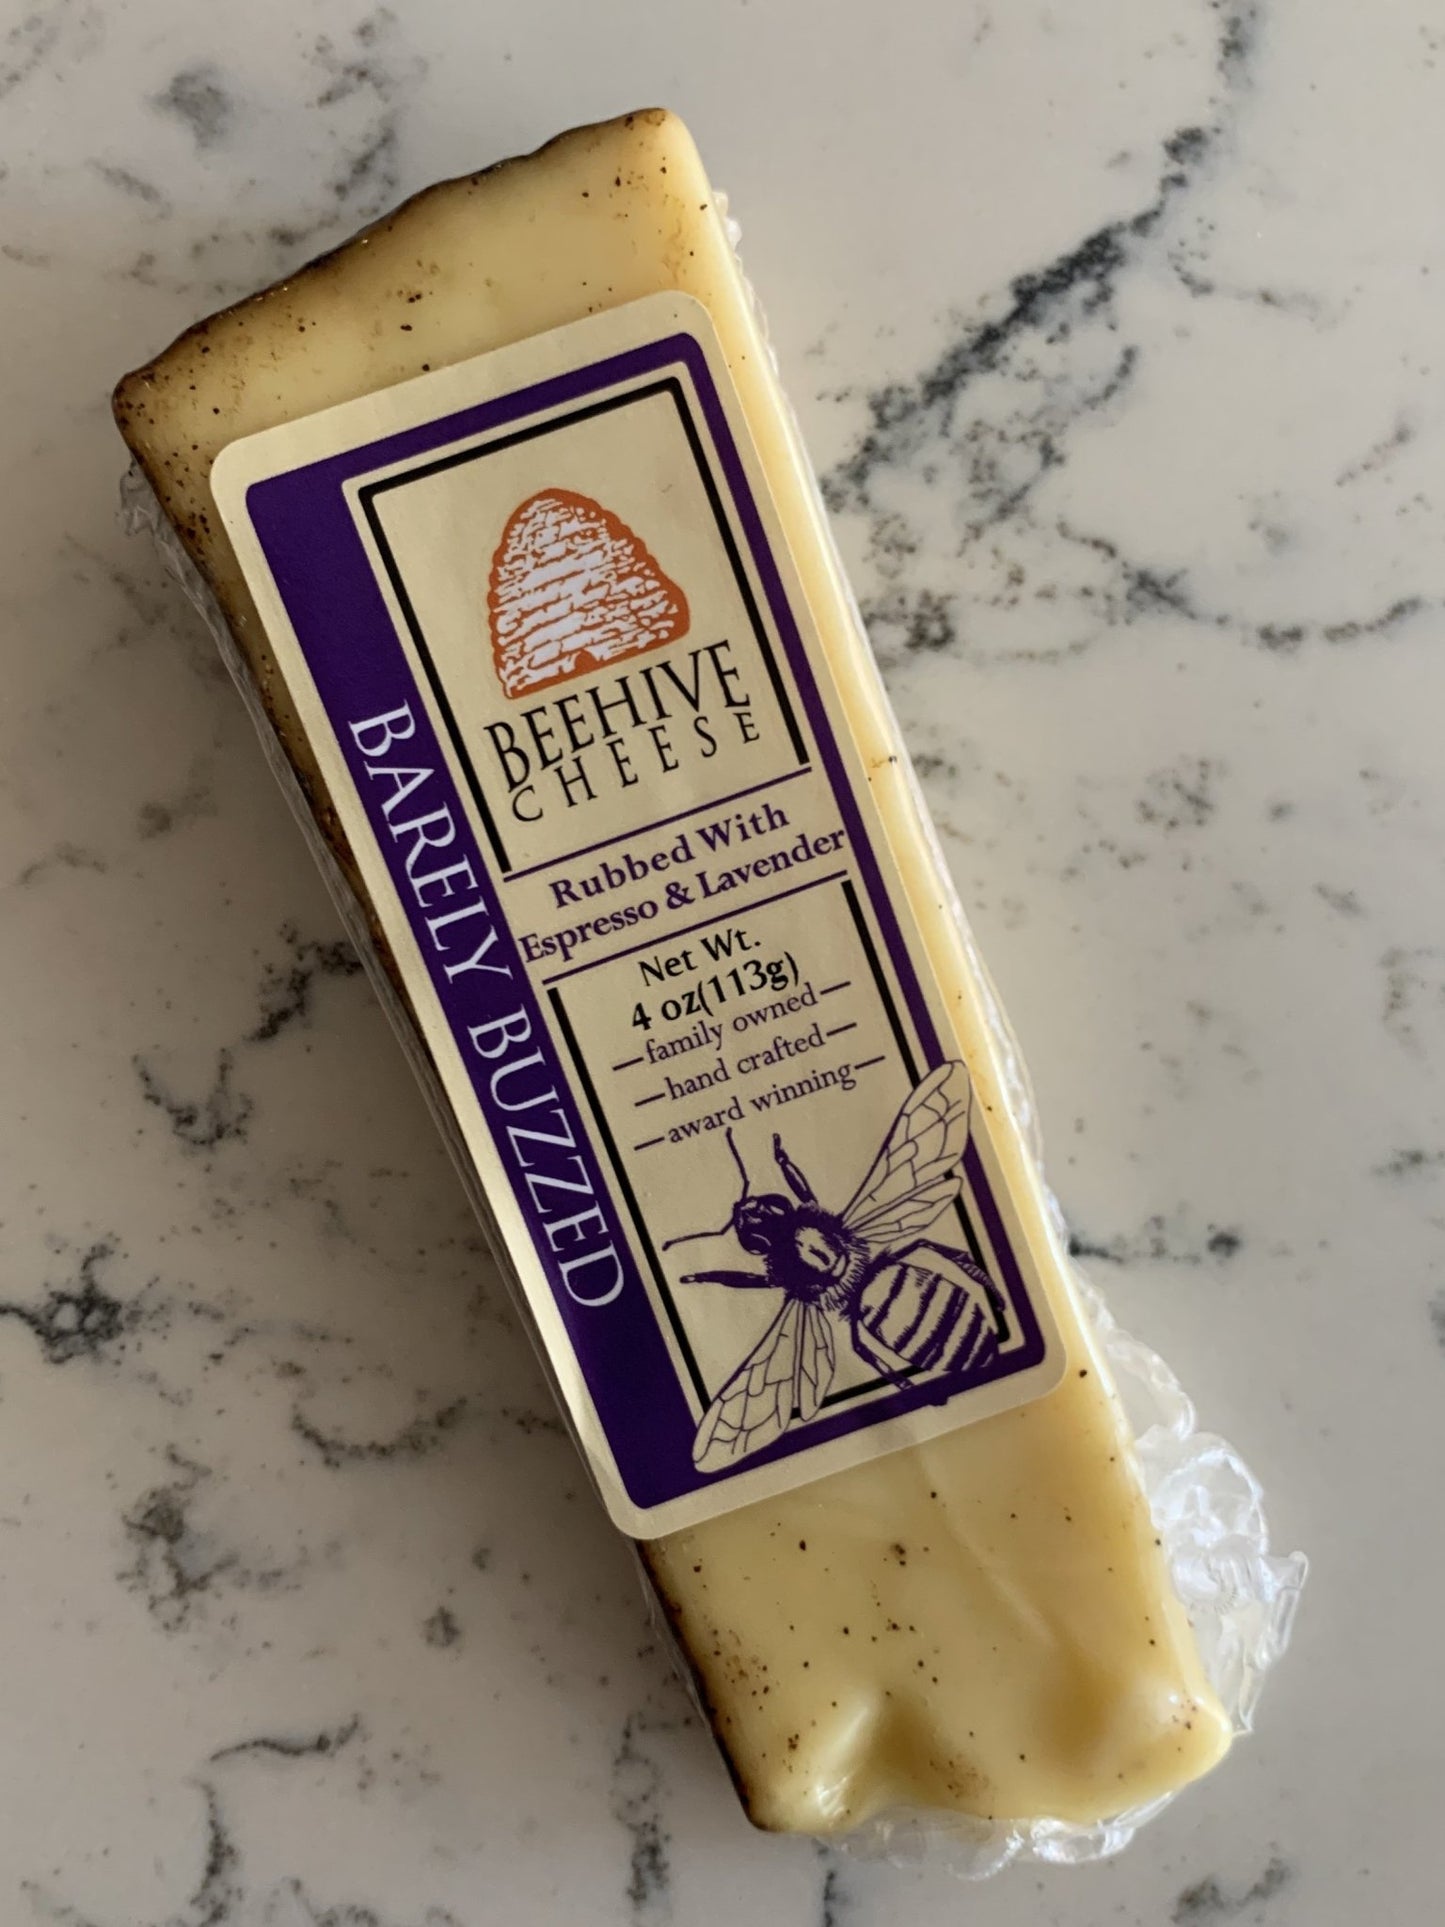 Beehive Cheese "Barely Buzzed" Cheddar rubbed with Espresso and Lavender, Utah (4oz) - DECANTsf